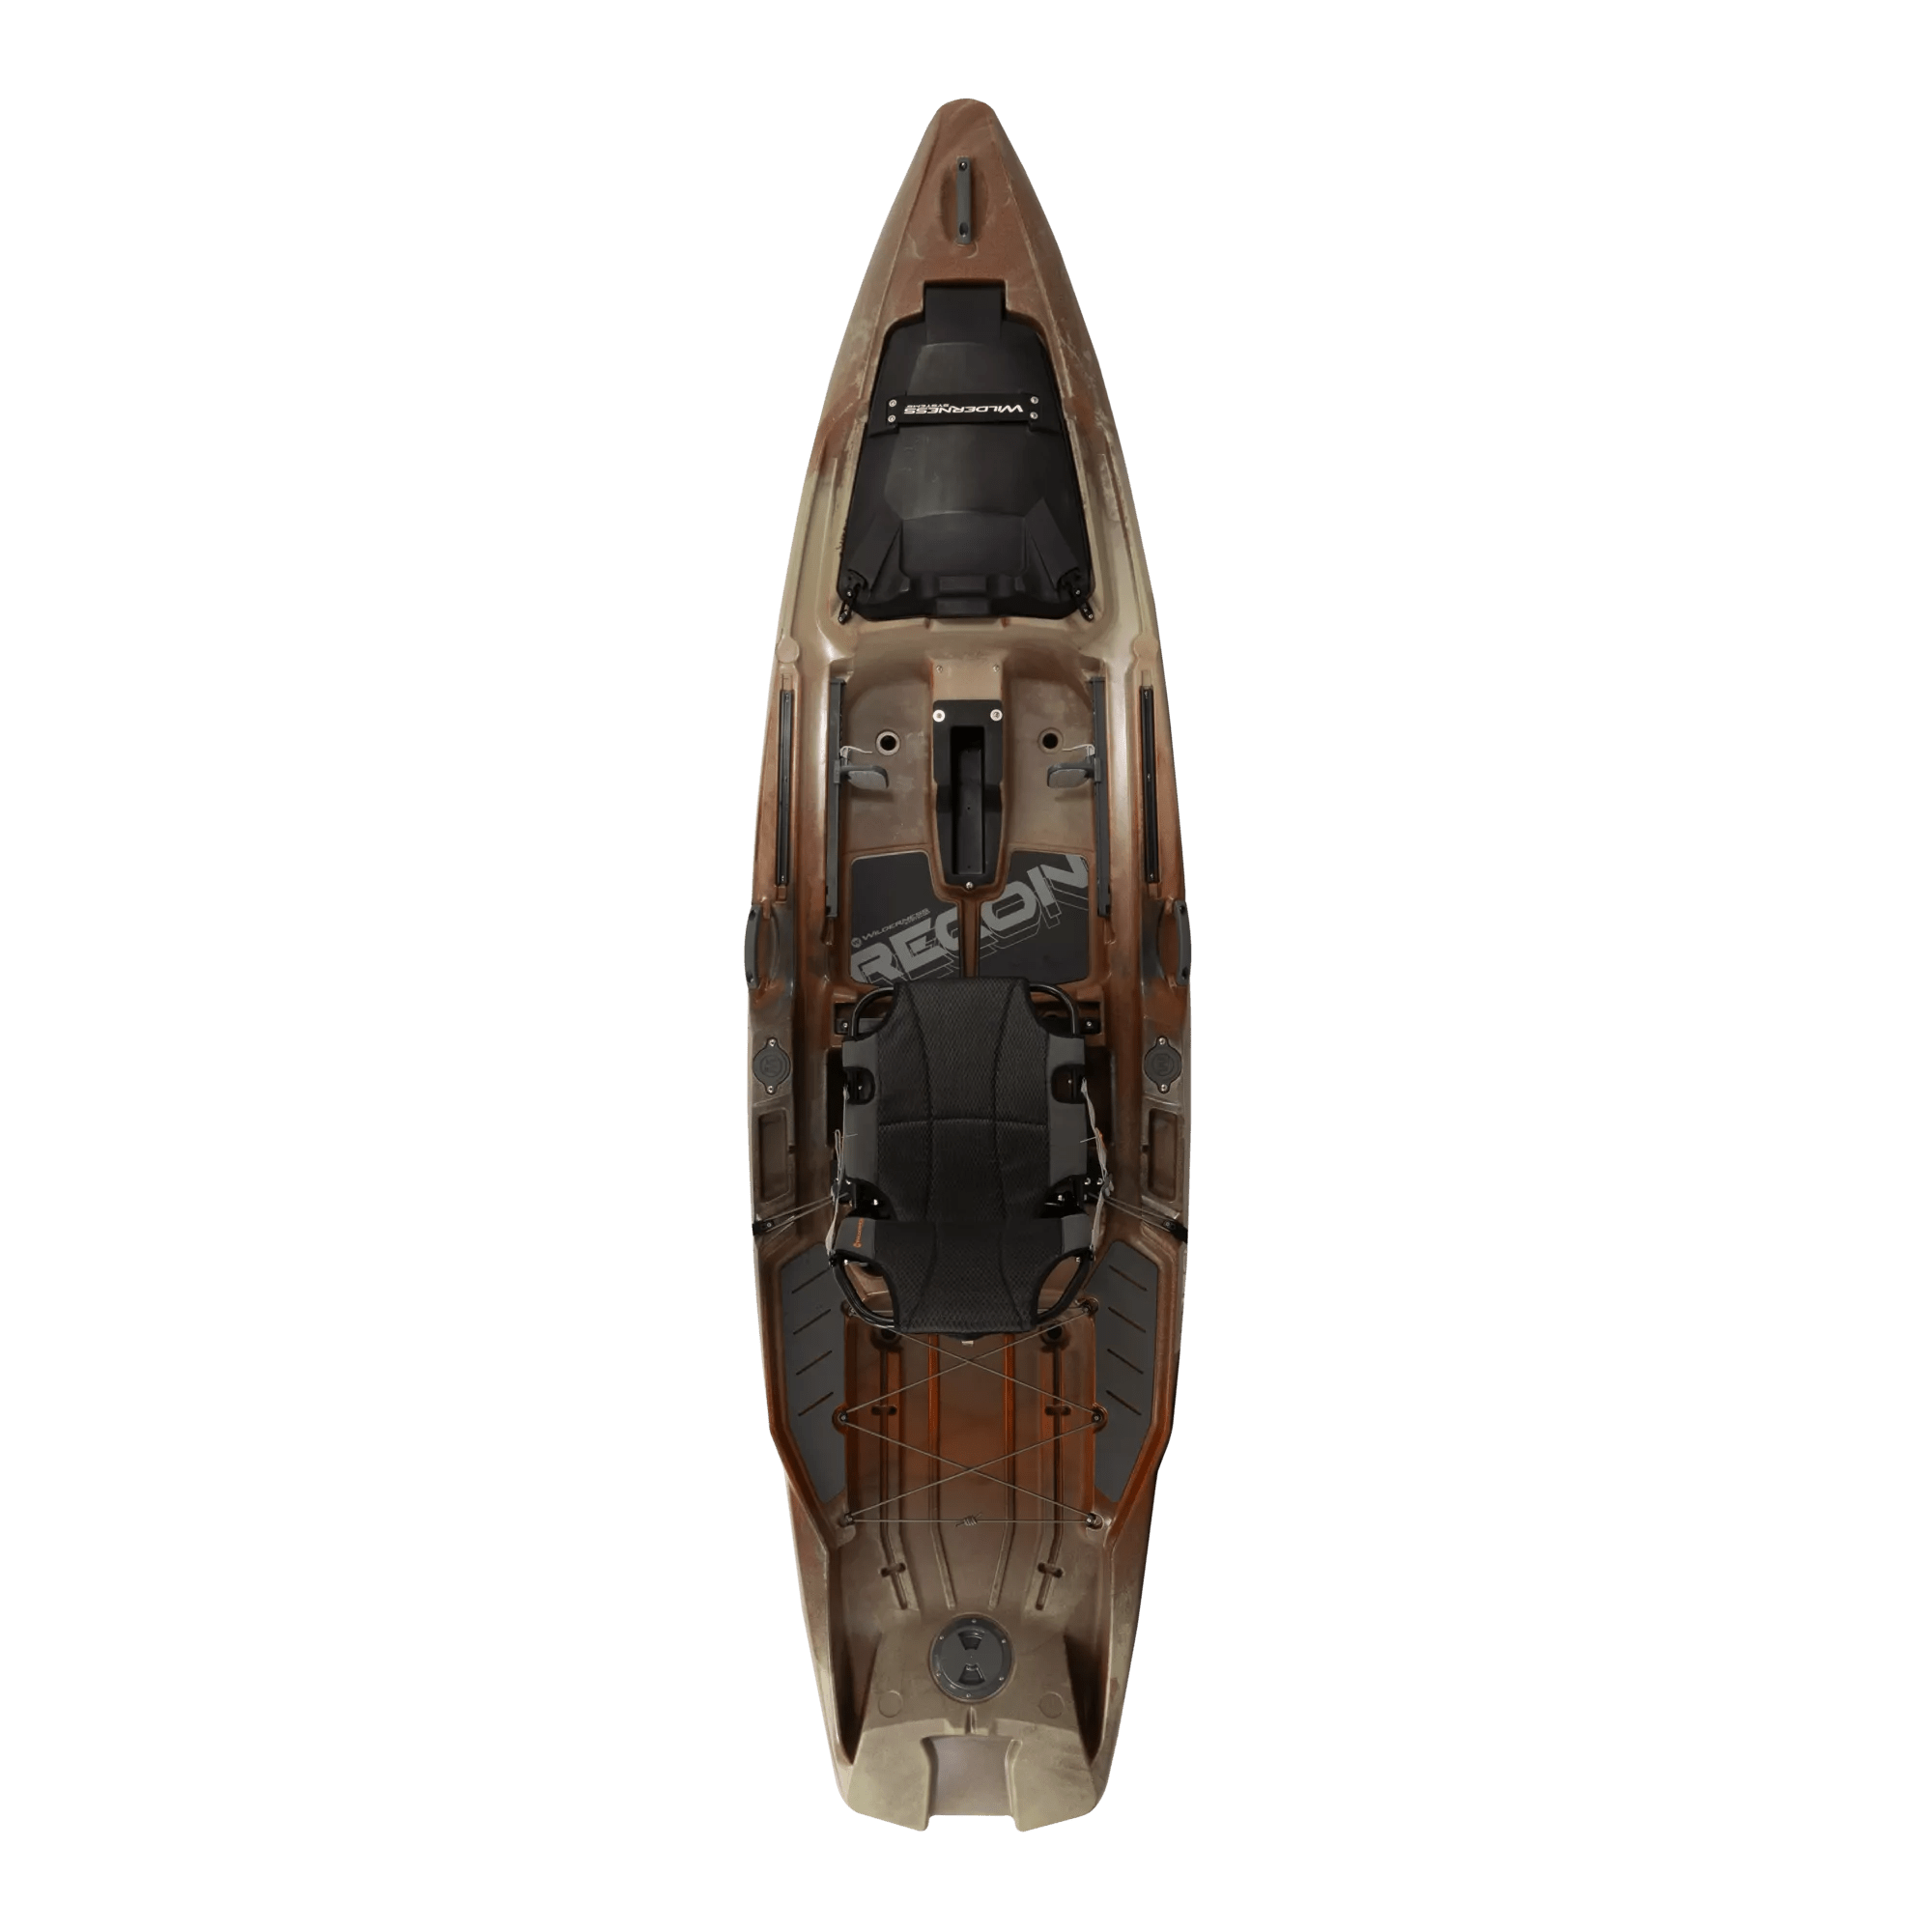 Recon 120 Tactical Fishing Intelligence Kayak from Wilderness Systems -  Adjustability, Luxurious Comfort and Gasketed Hatch